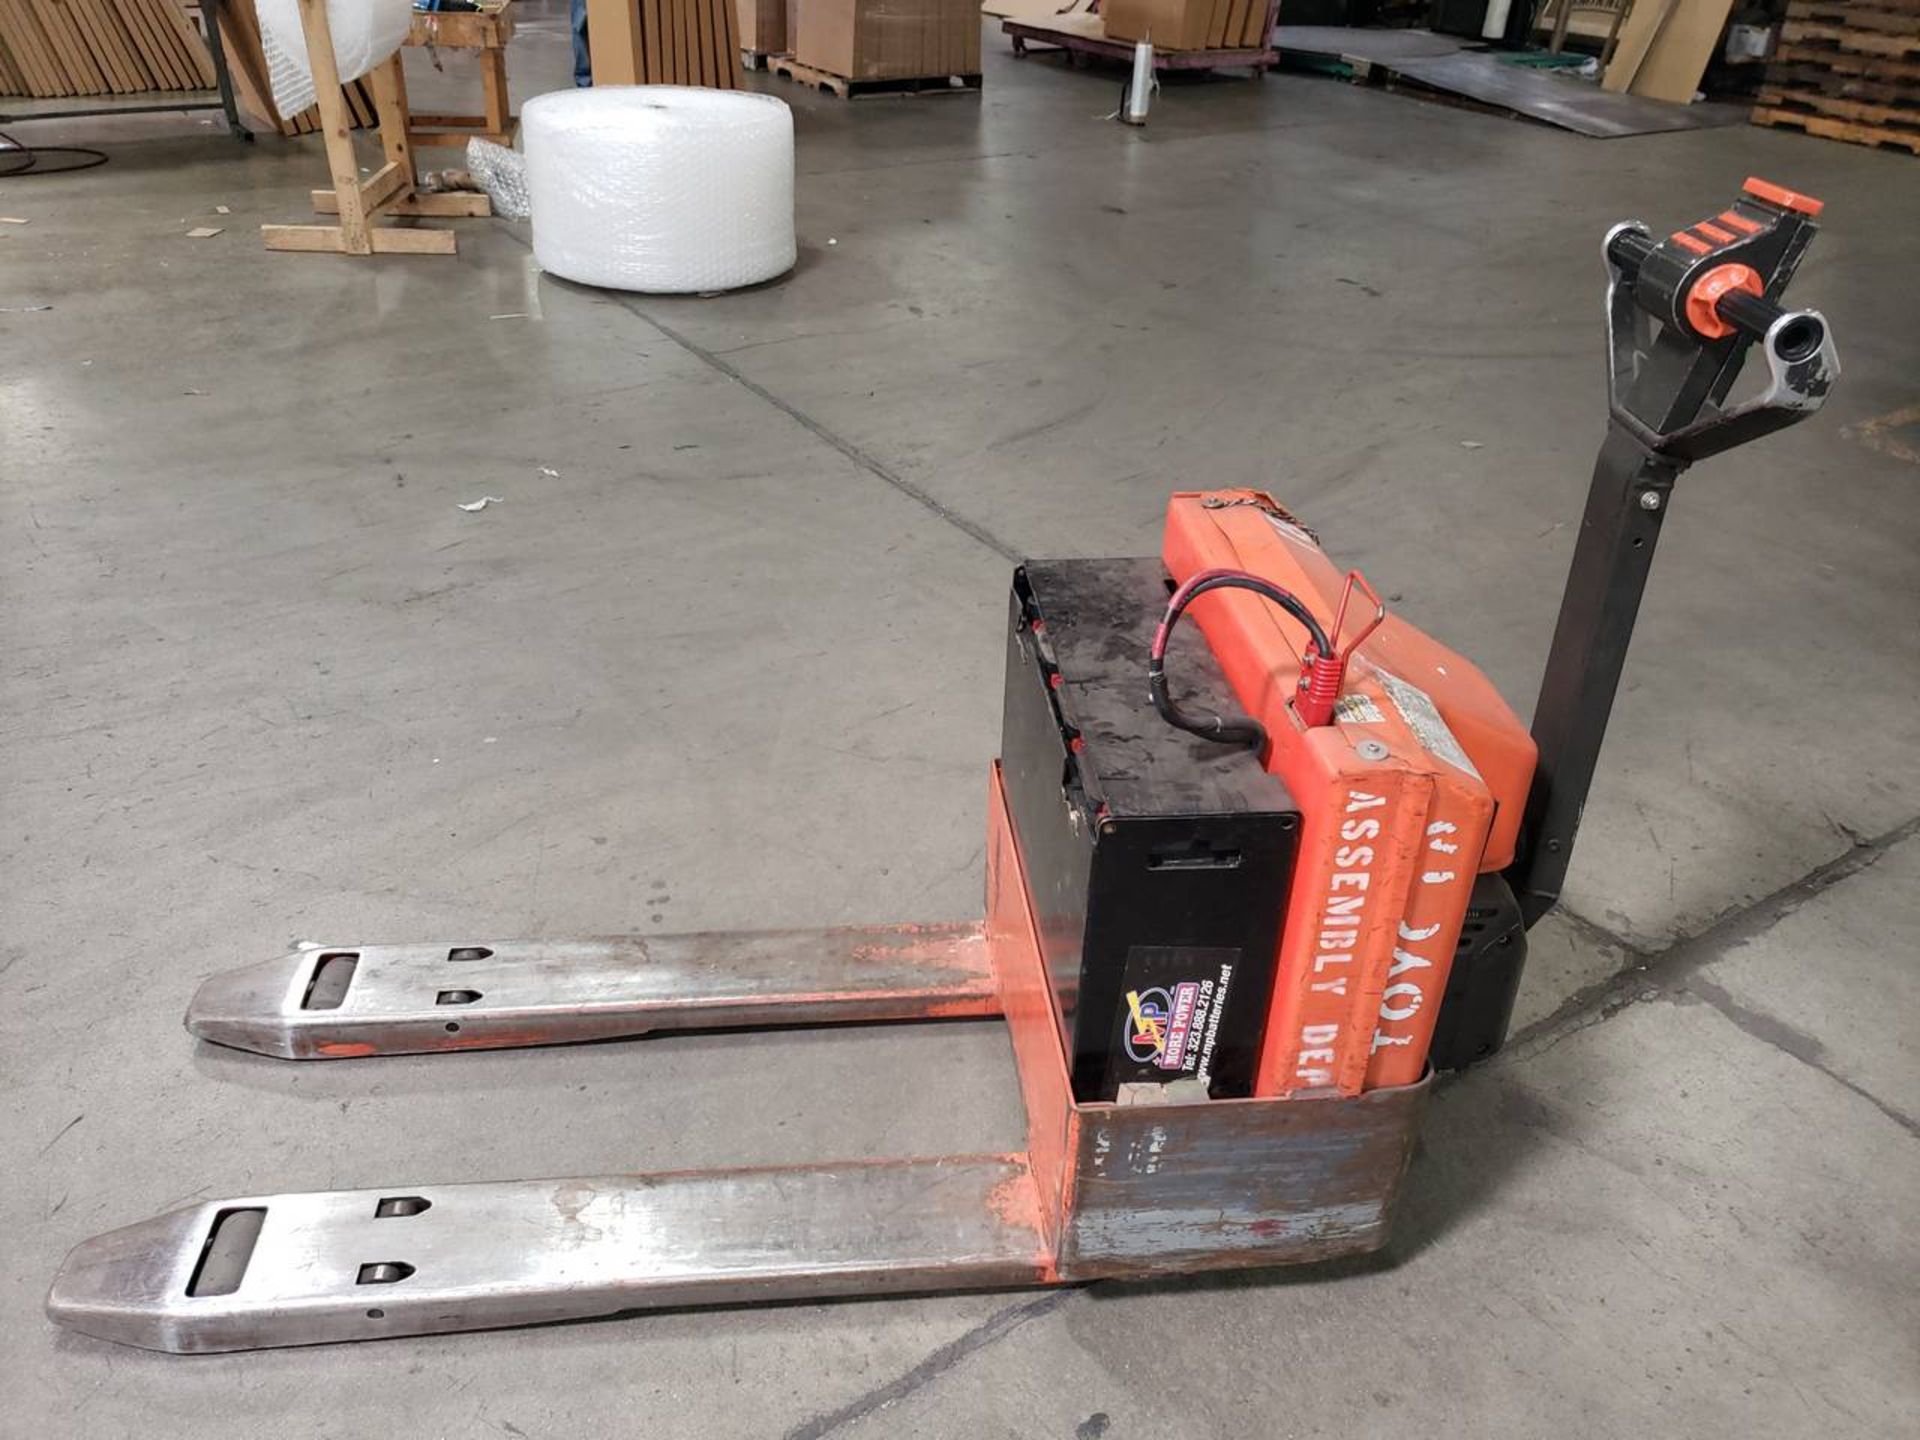 Toyota 6HBW20 24V Electric Pallet Jack 2 Ton Max Capacity, 405.3 Hrs S/N 6HBW20-16381 - Image 3 of 6